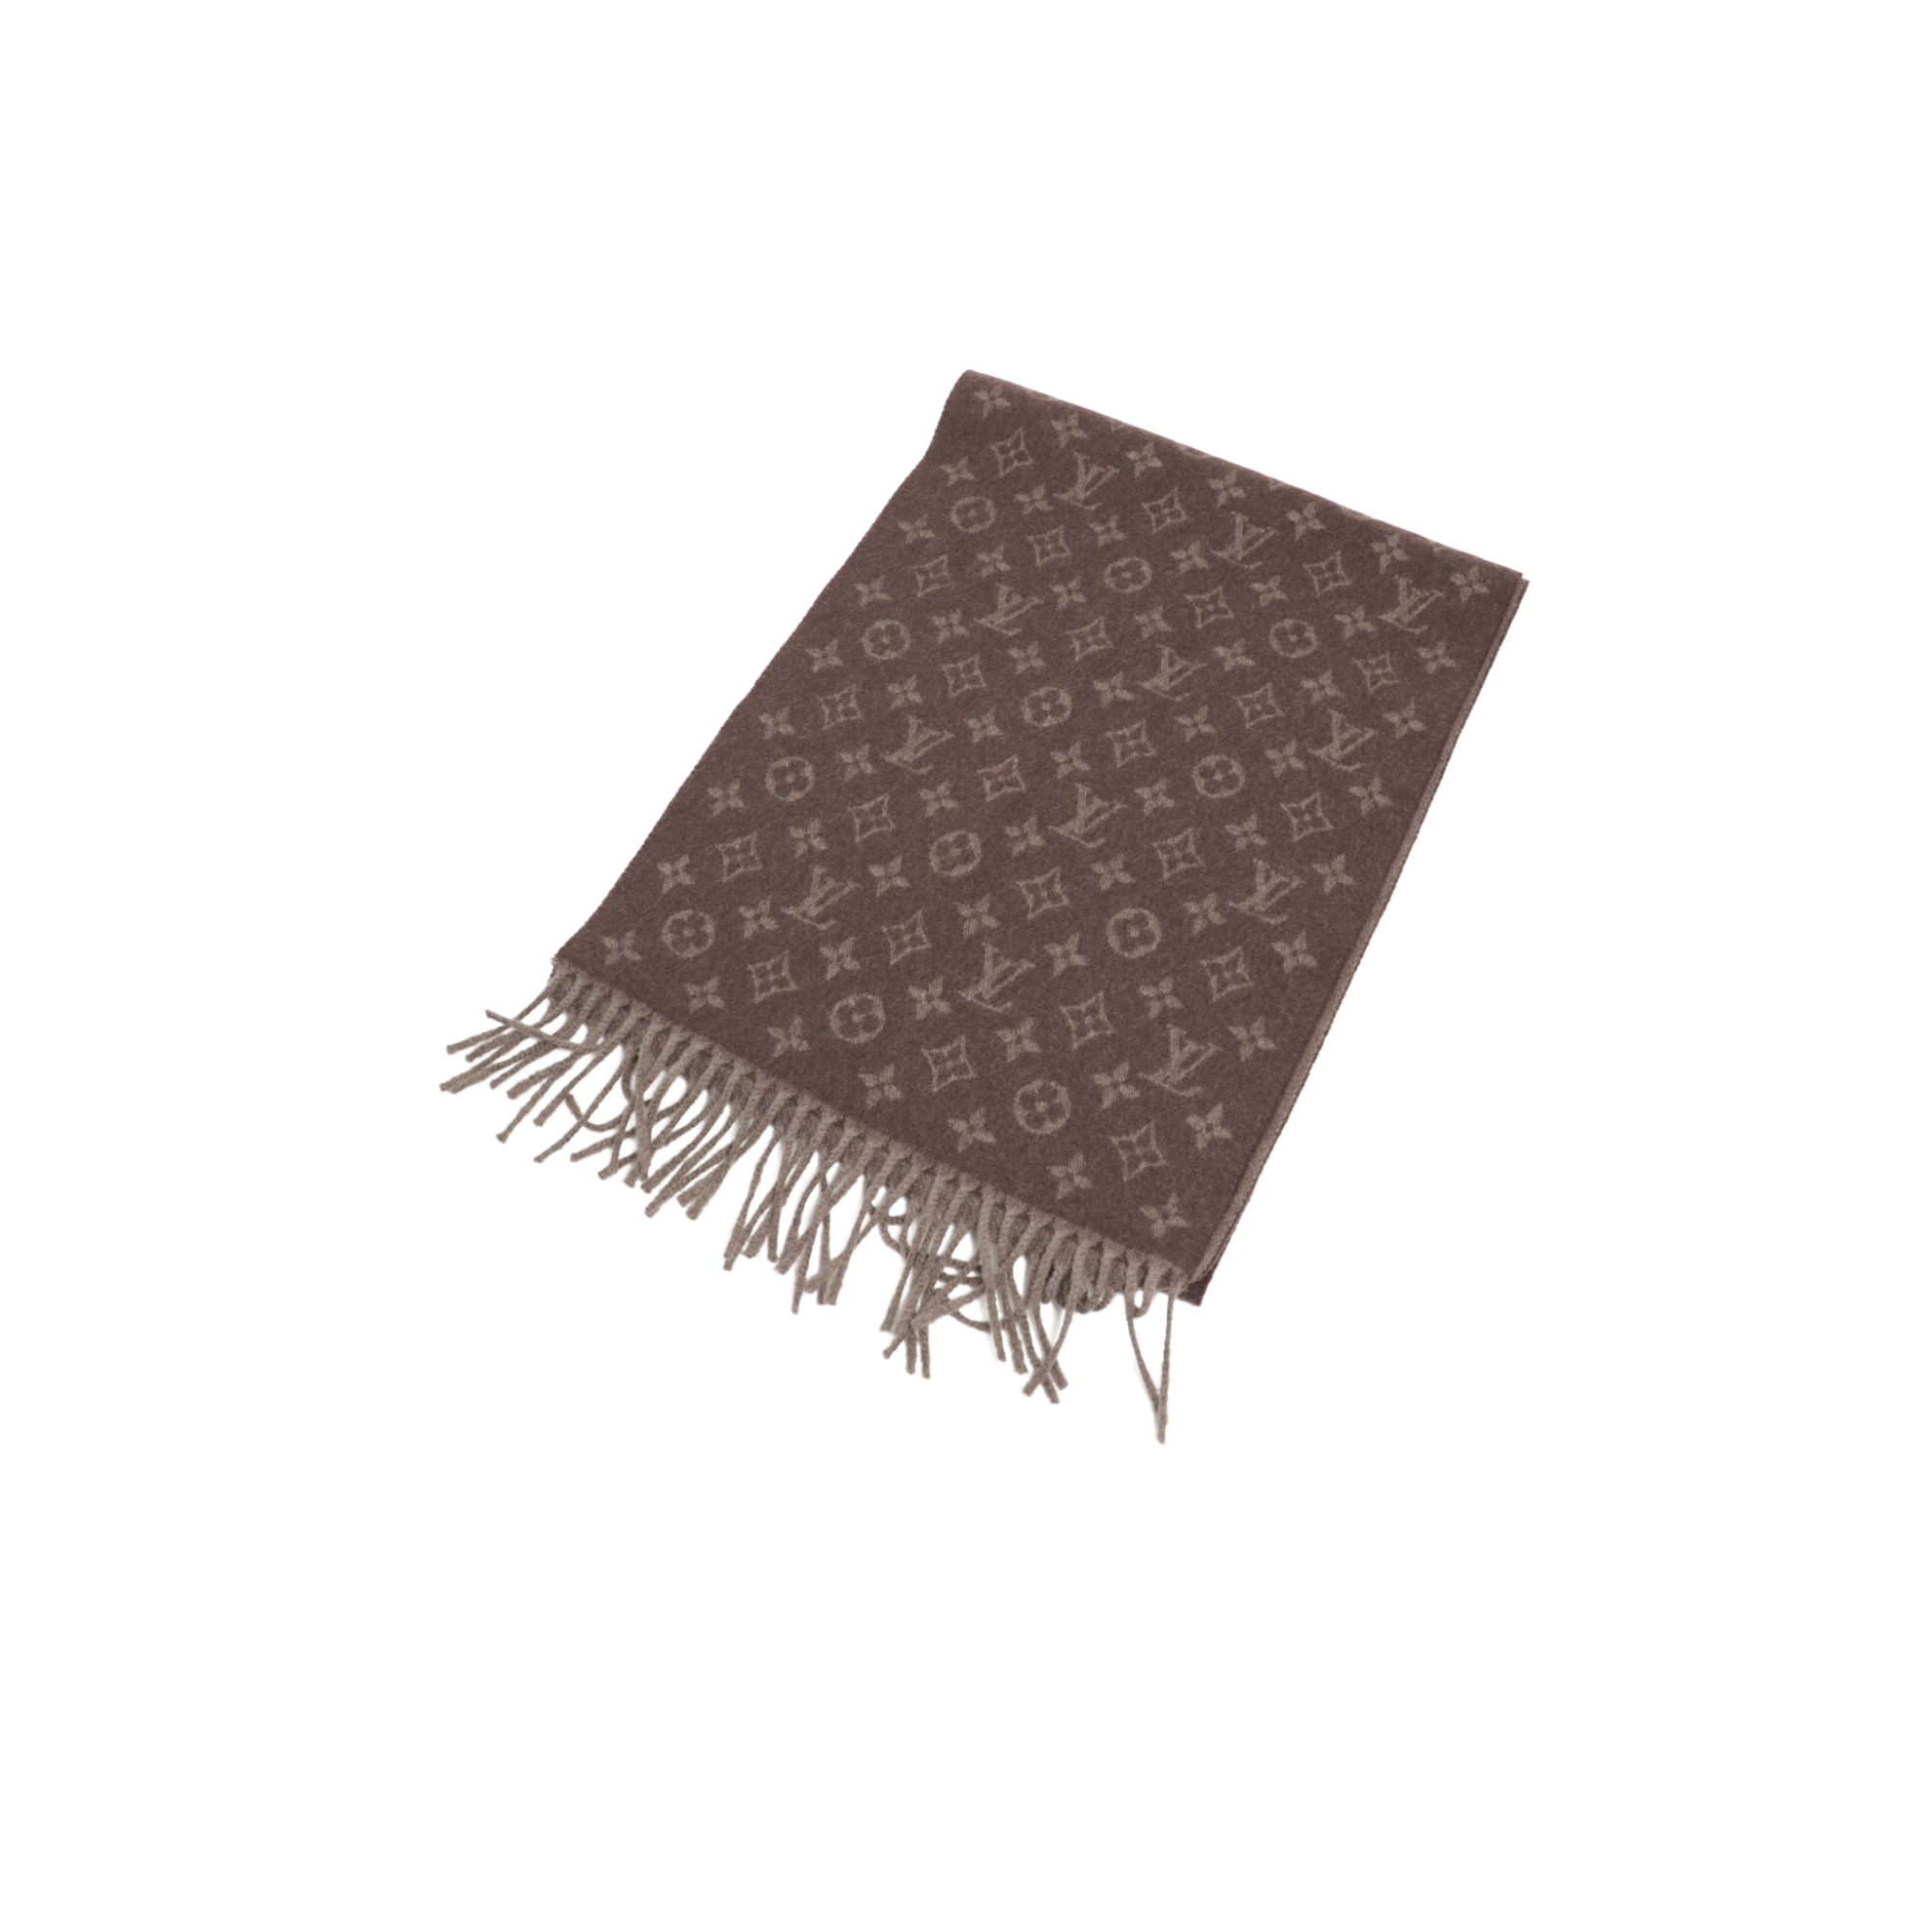 Products By Louis Vuitton: Monogram Gradient Scarf